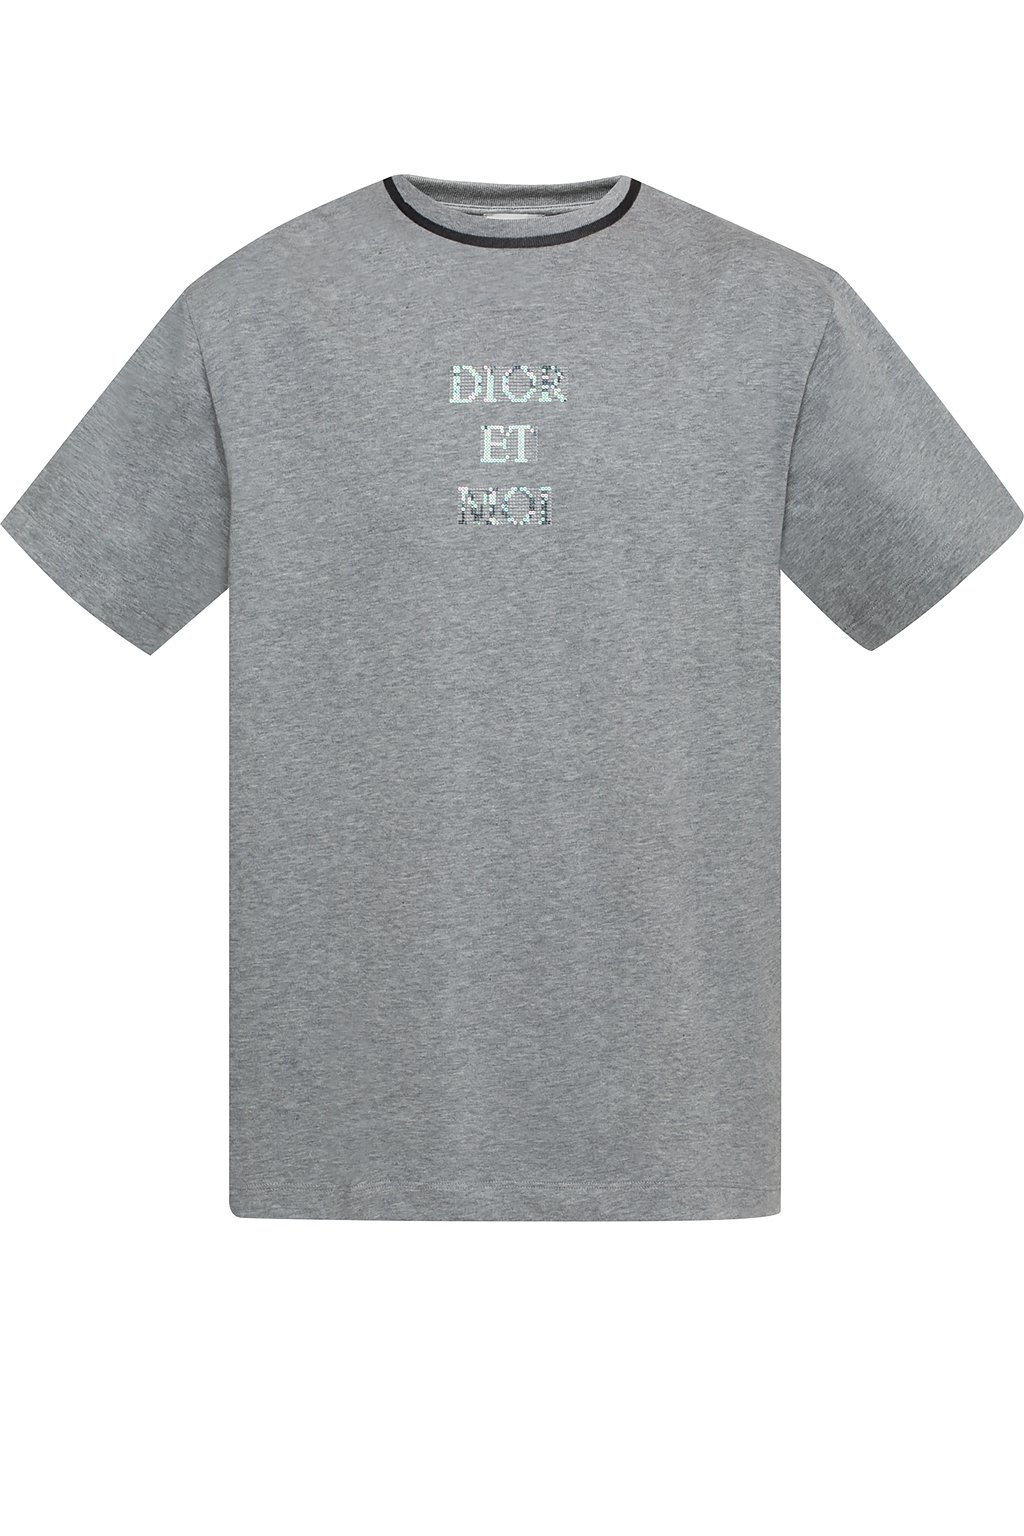 Mens Dior Erl Kim Jones Embroidered T Shirt Long Sleeve Large Made in Italy  New